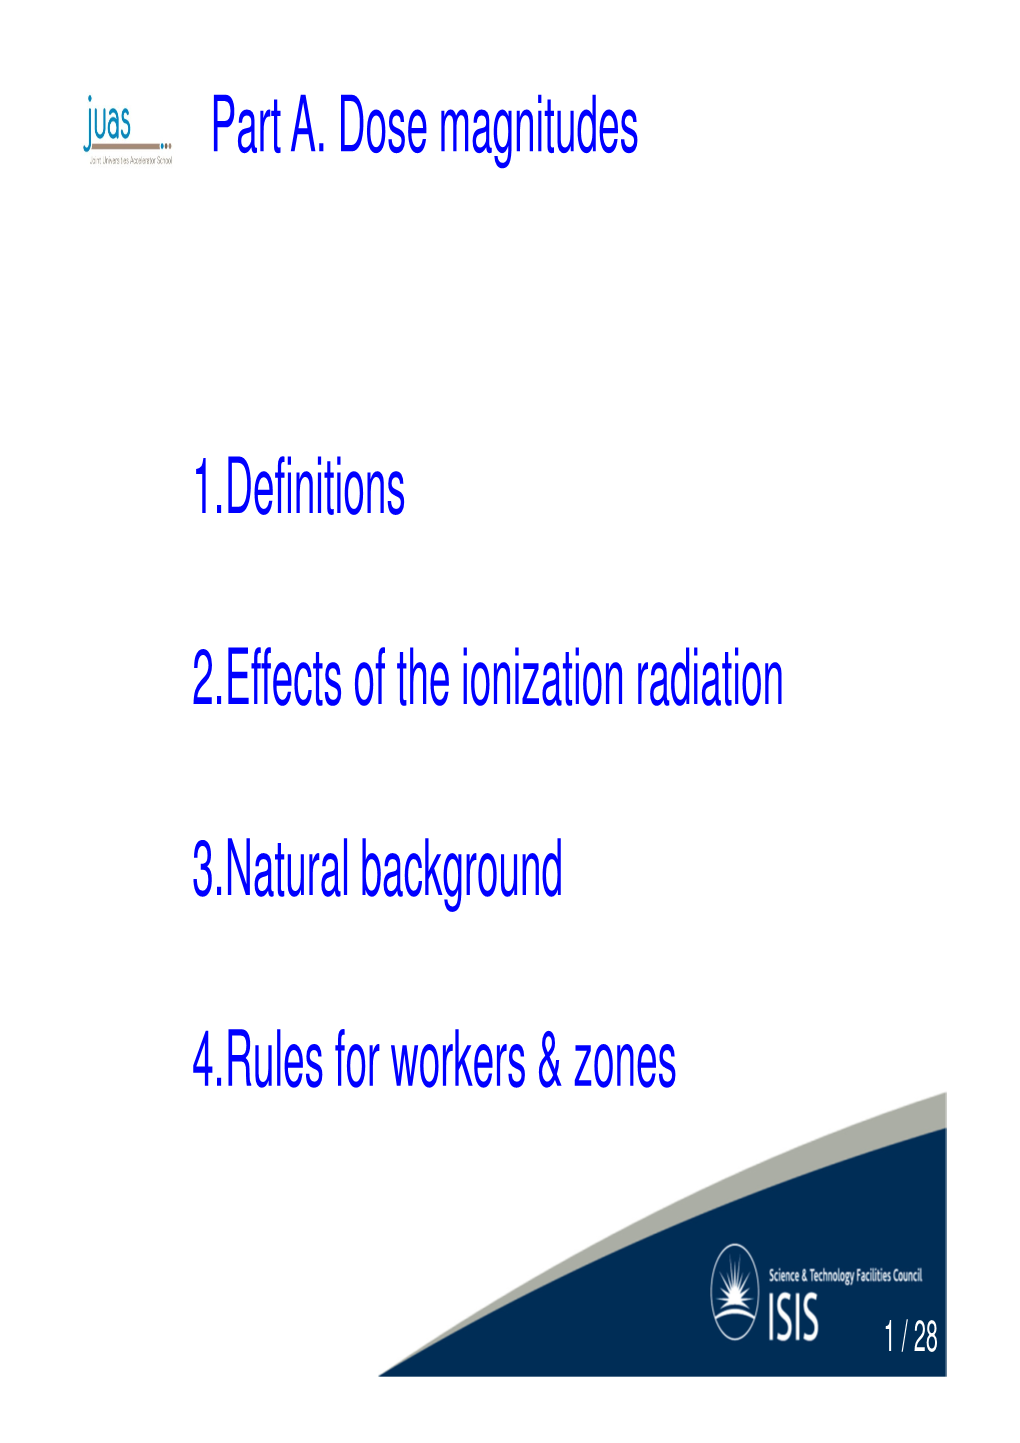 1.Definitions 2.Effects of the Ionization Radiation 3.Natural Background 4